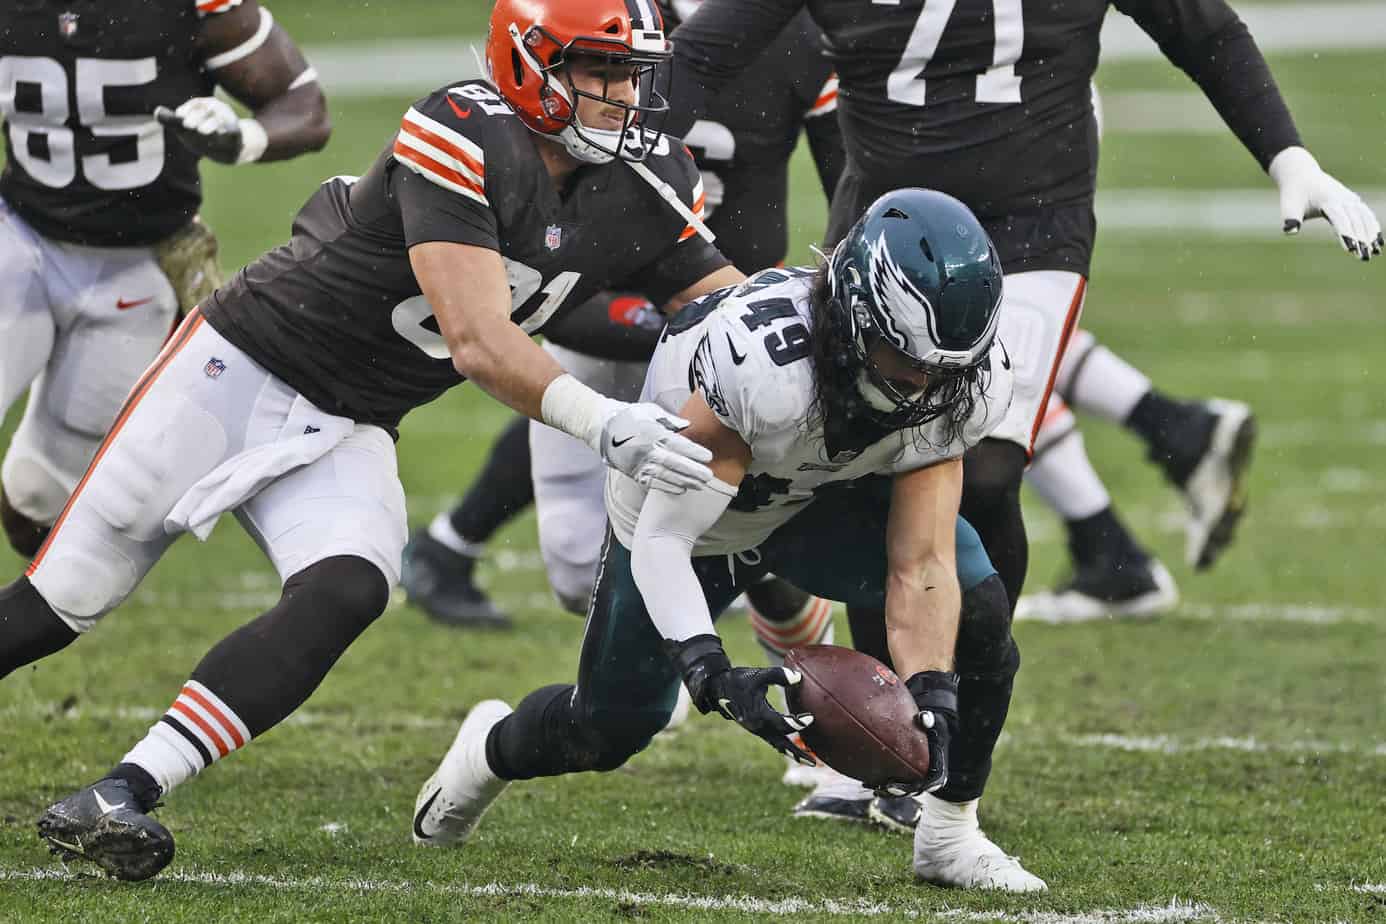 Browns at Eagles for TNF: Preview and Free Pick